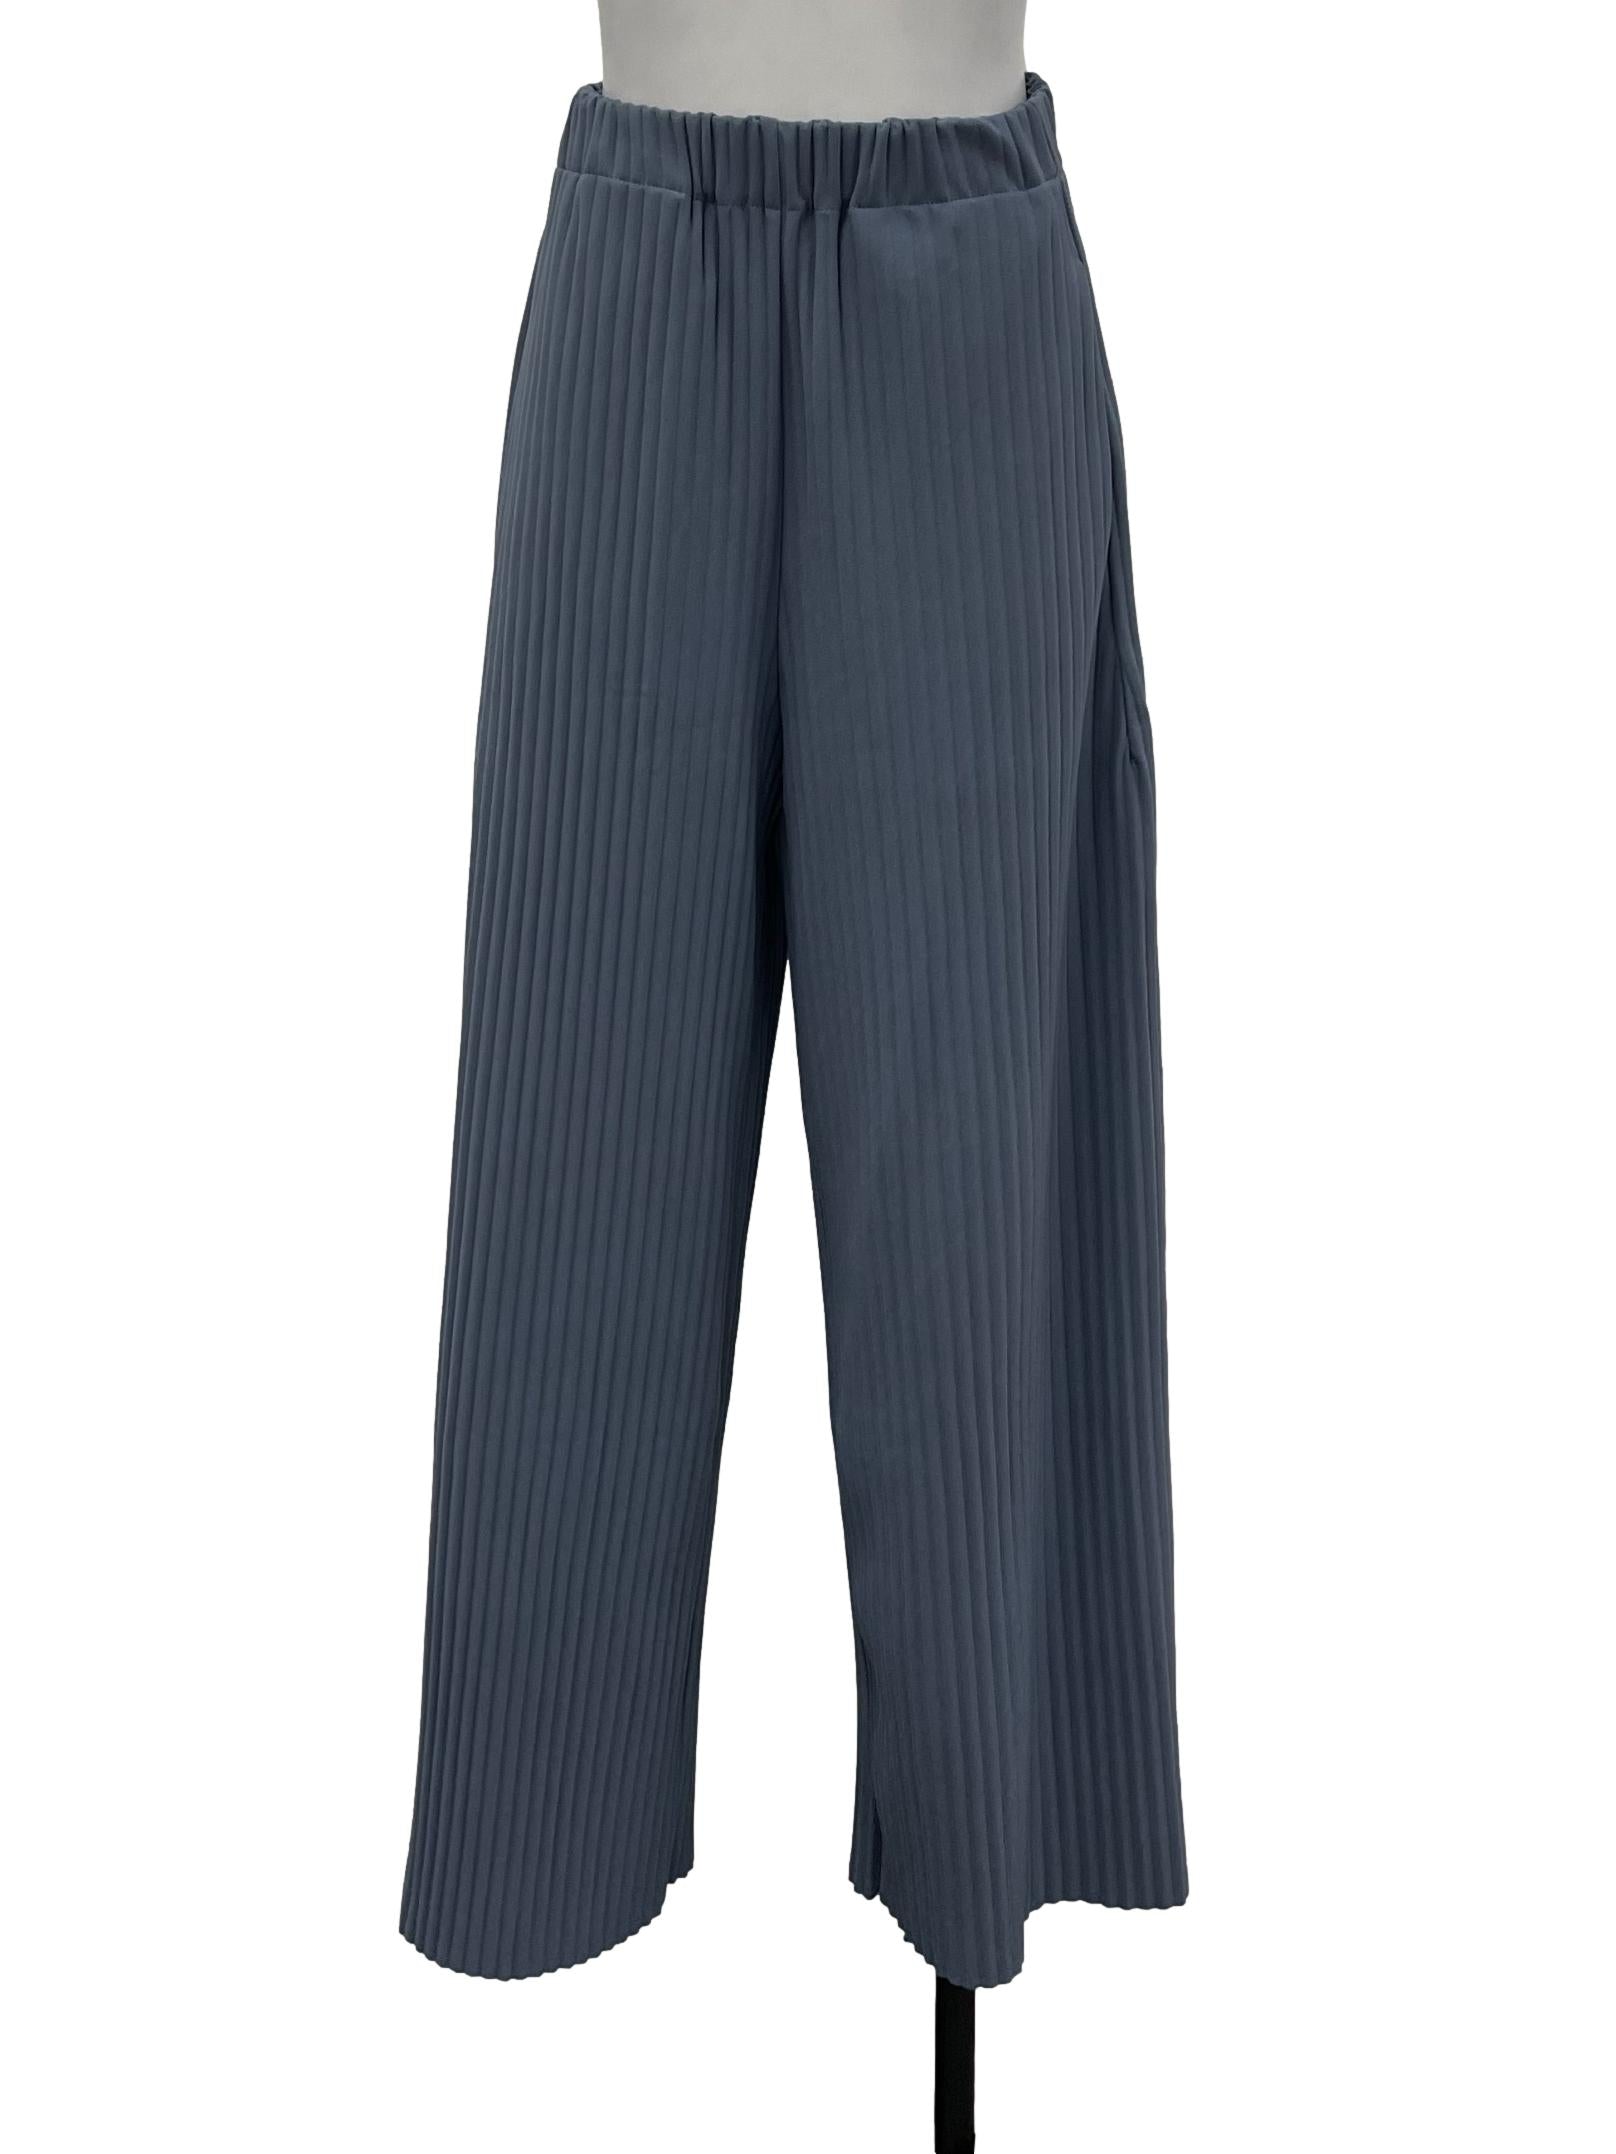 Stone Blue Pleated Stretchy Pants